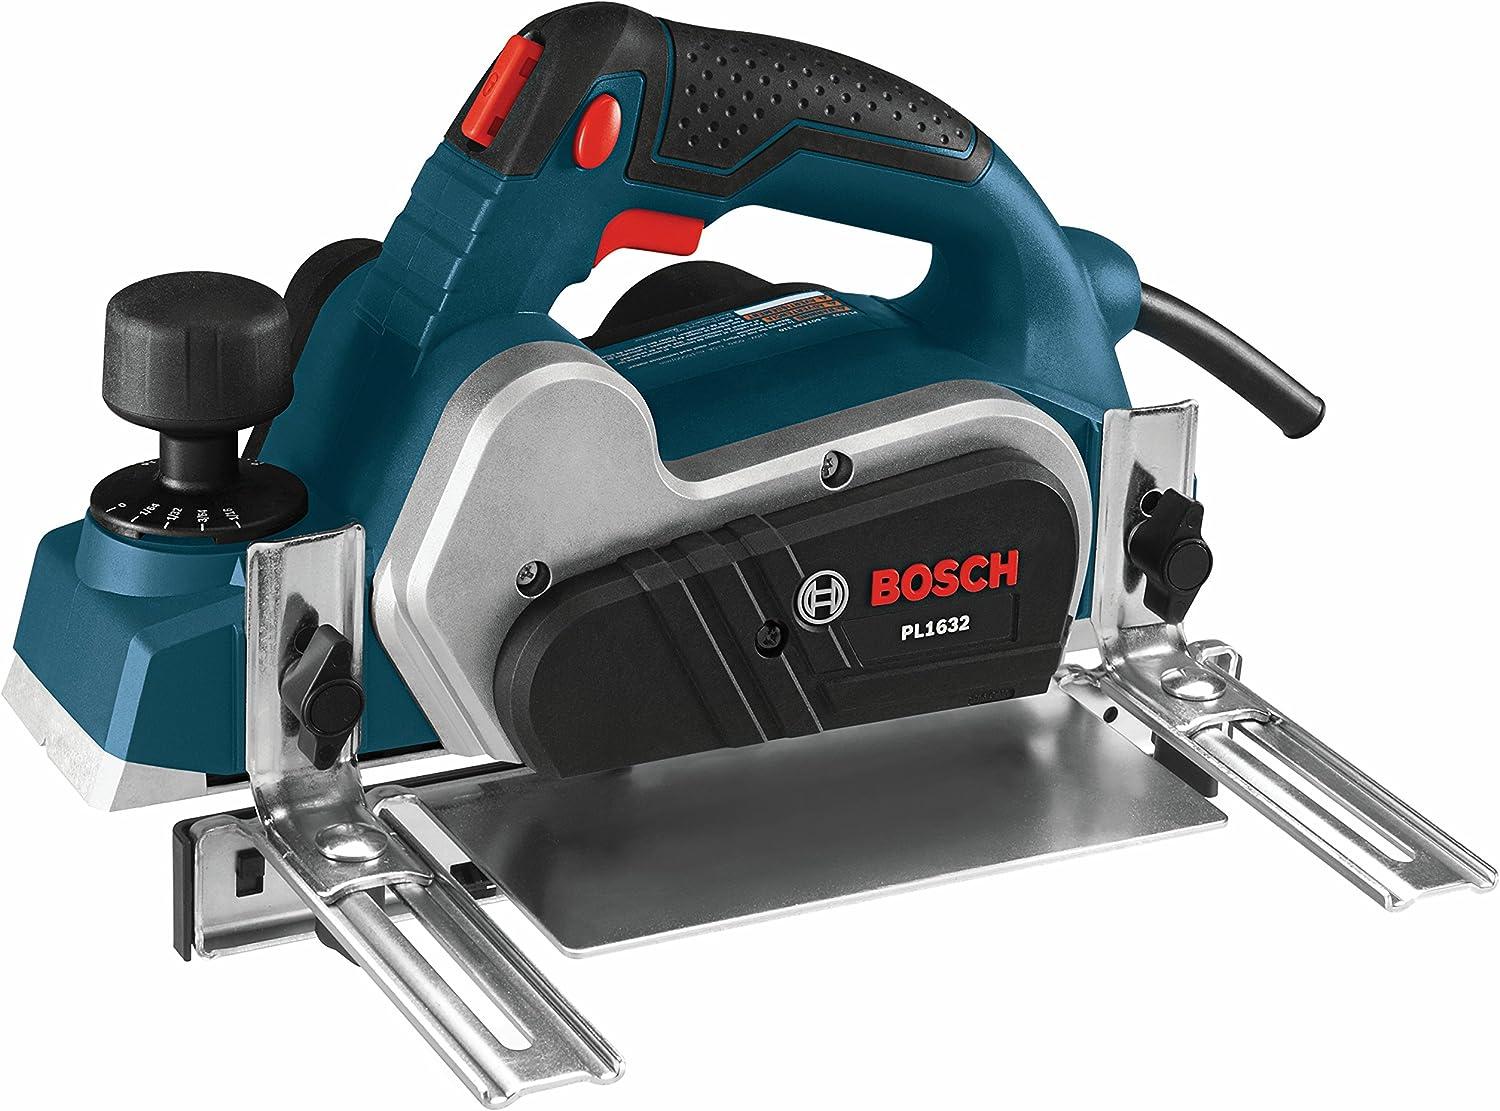 Bosch PL1632 6.5 Amp Hand Planer for $89 Shipped